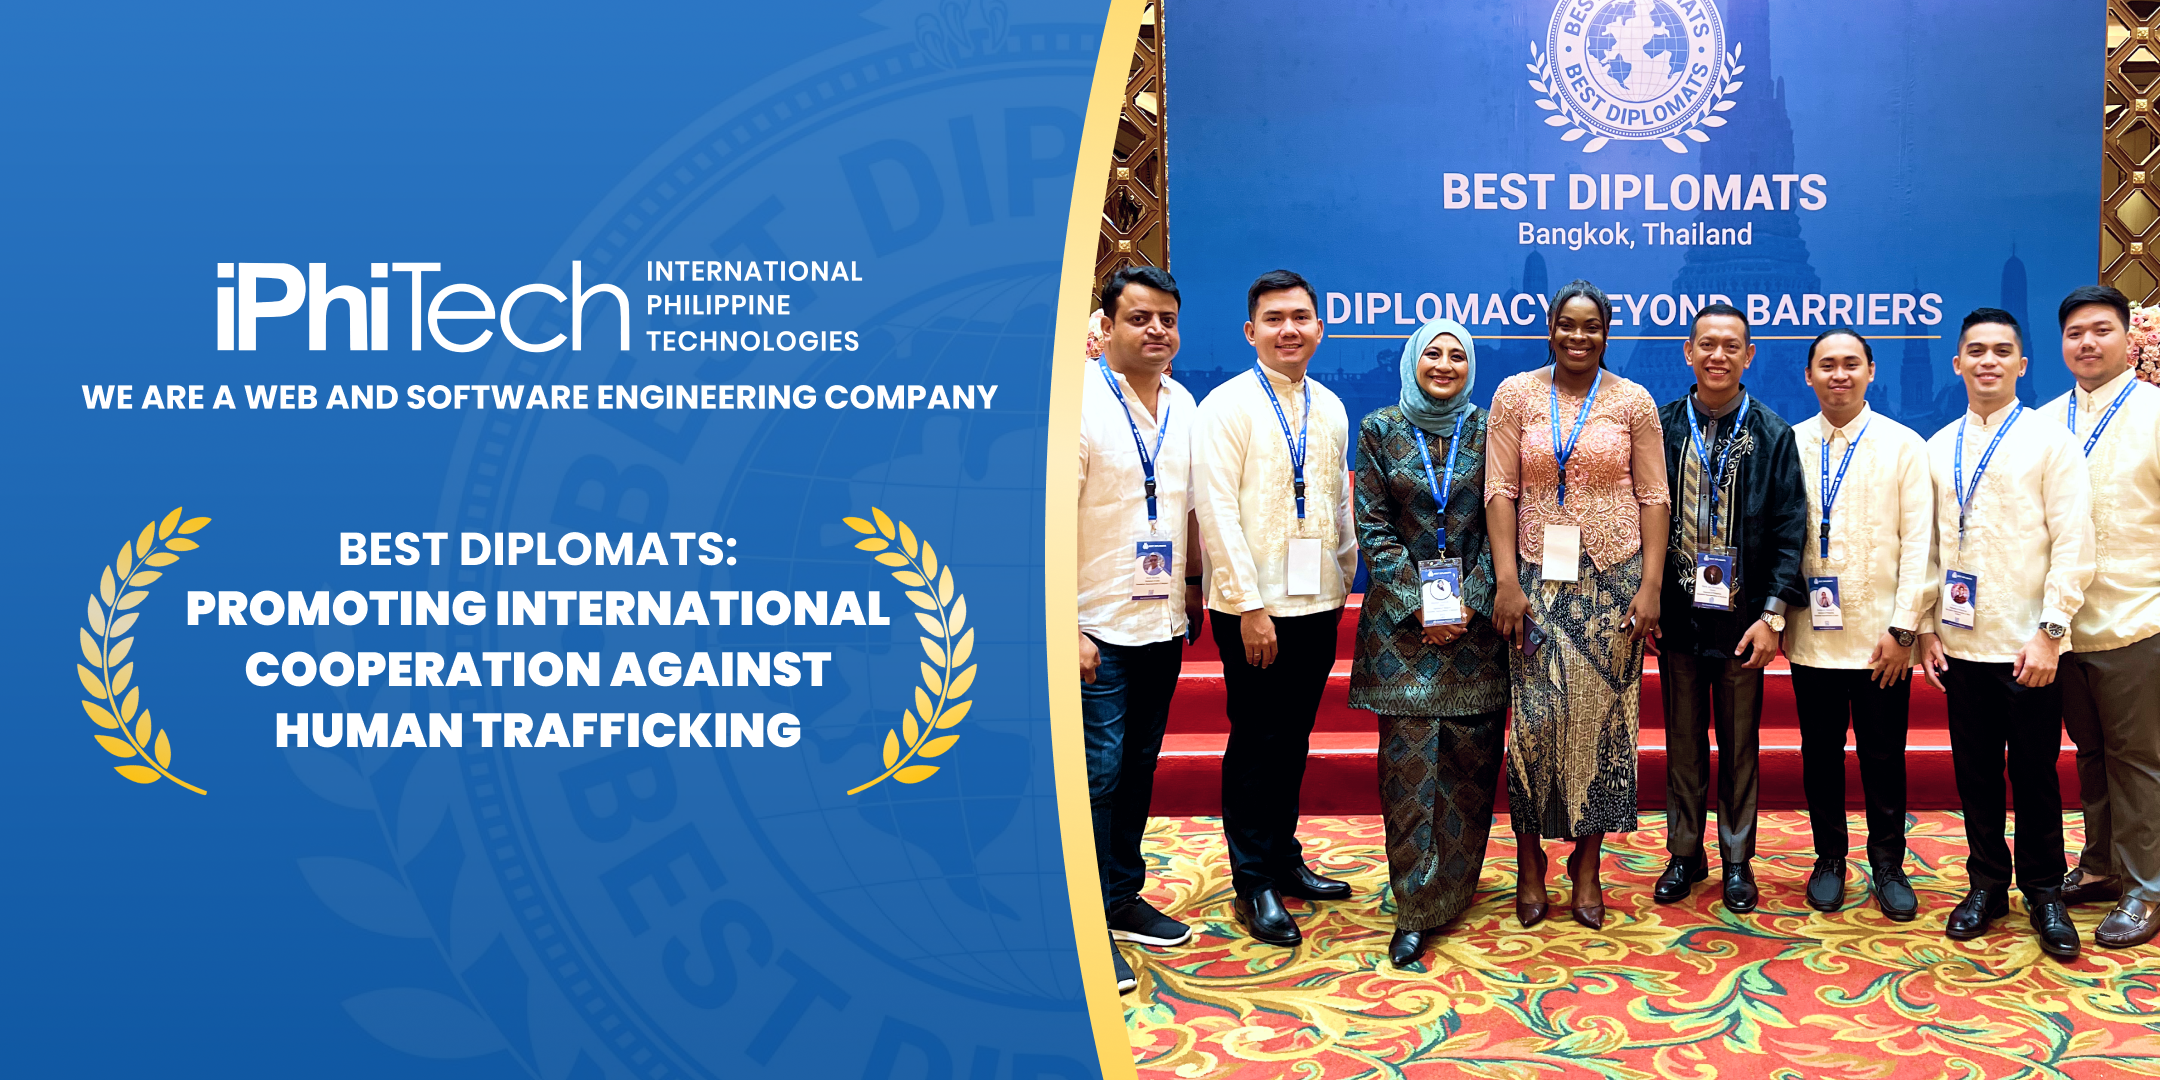 iPhiTech CEO and Executives attended the Best Diplomats in Bangkok, Thailand